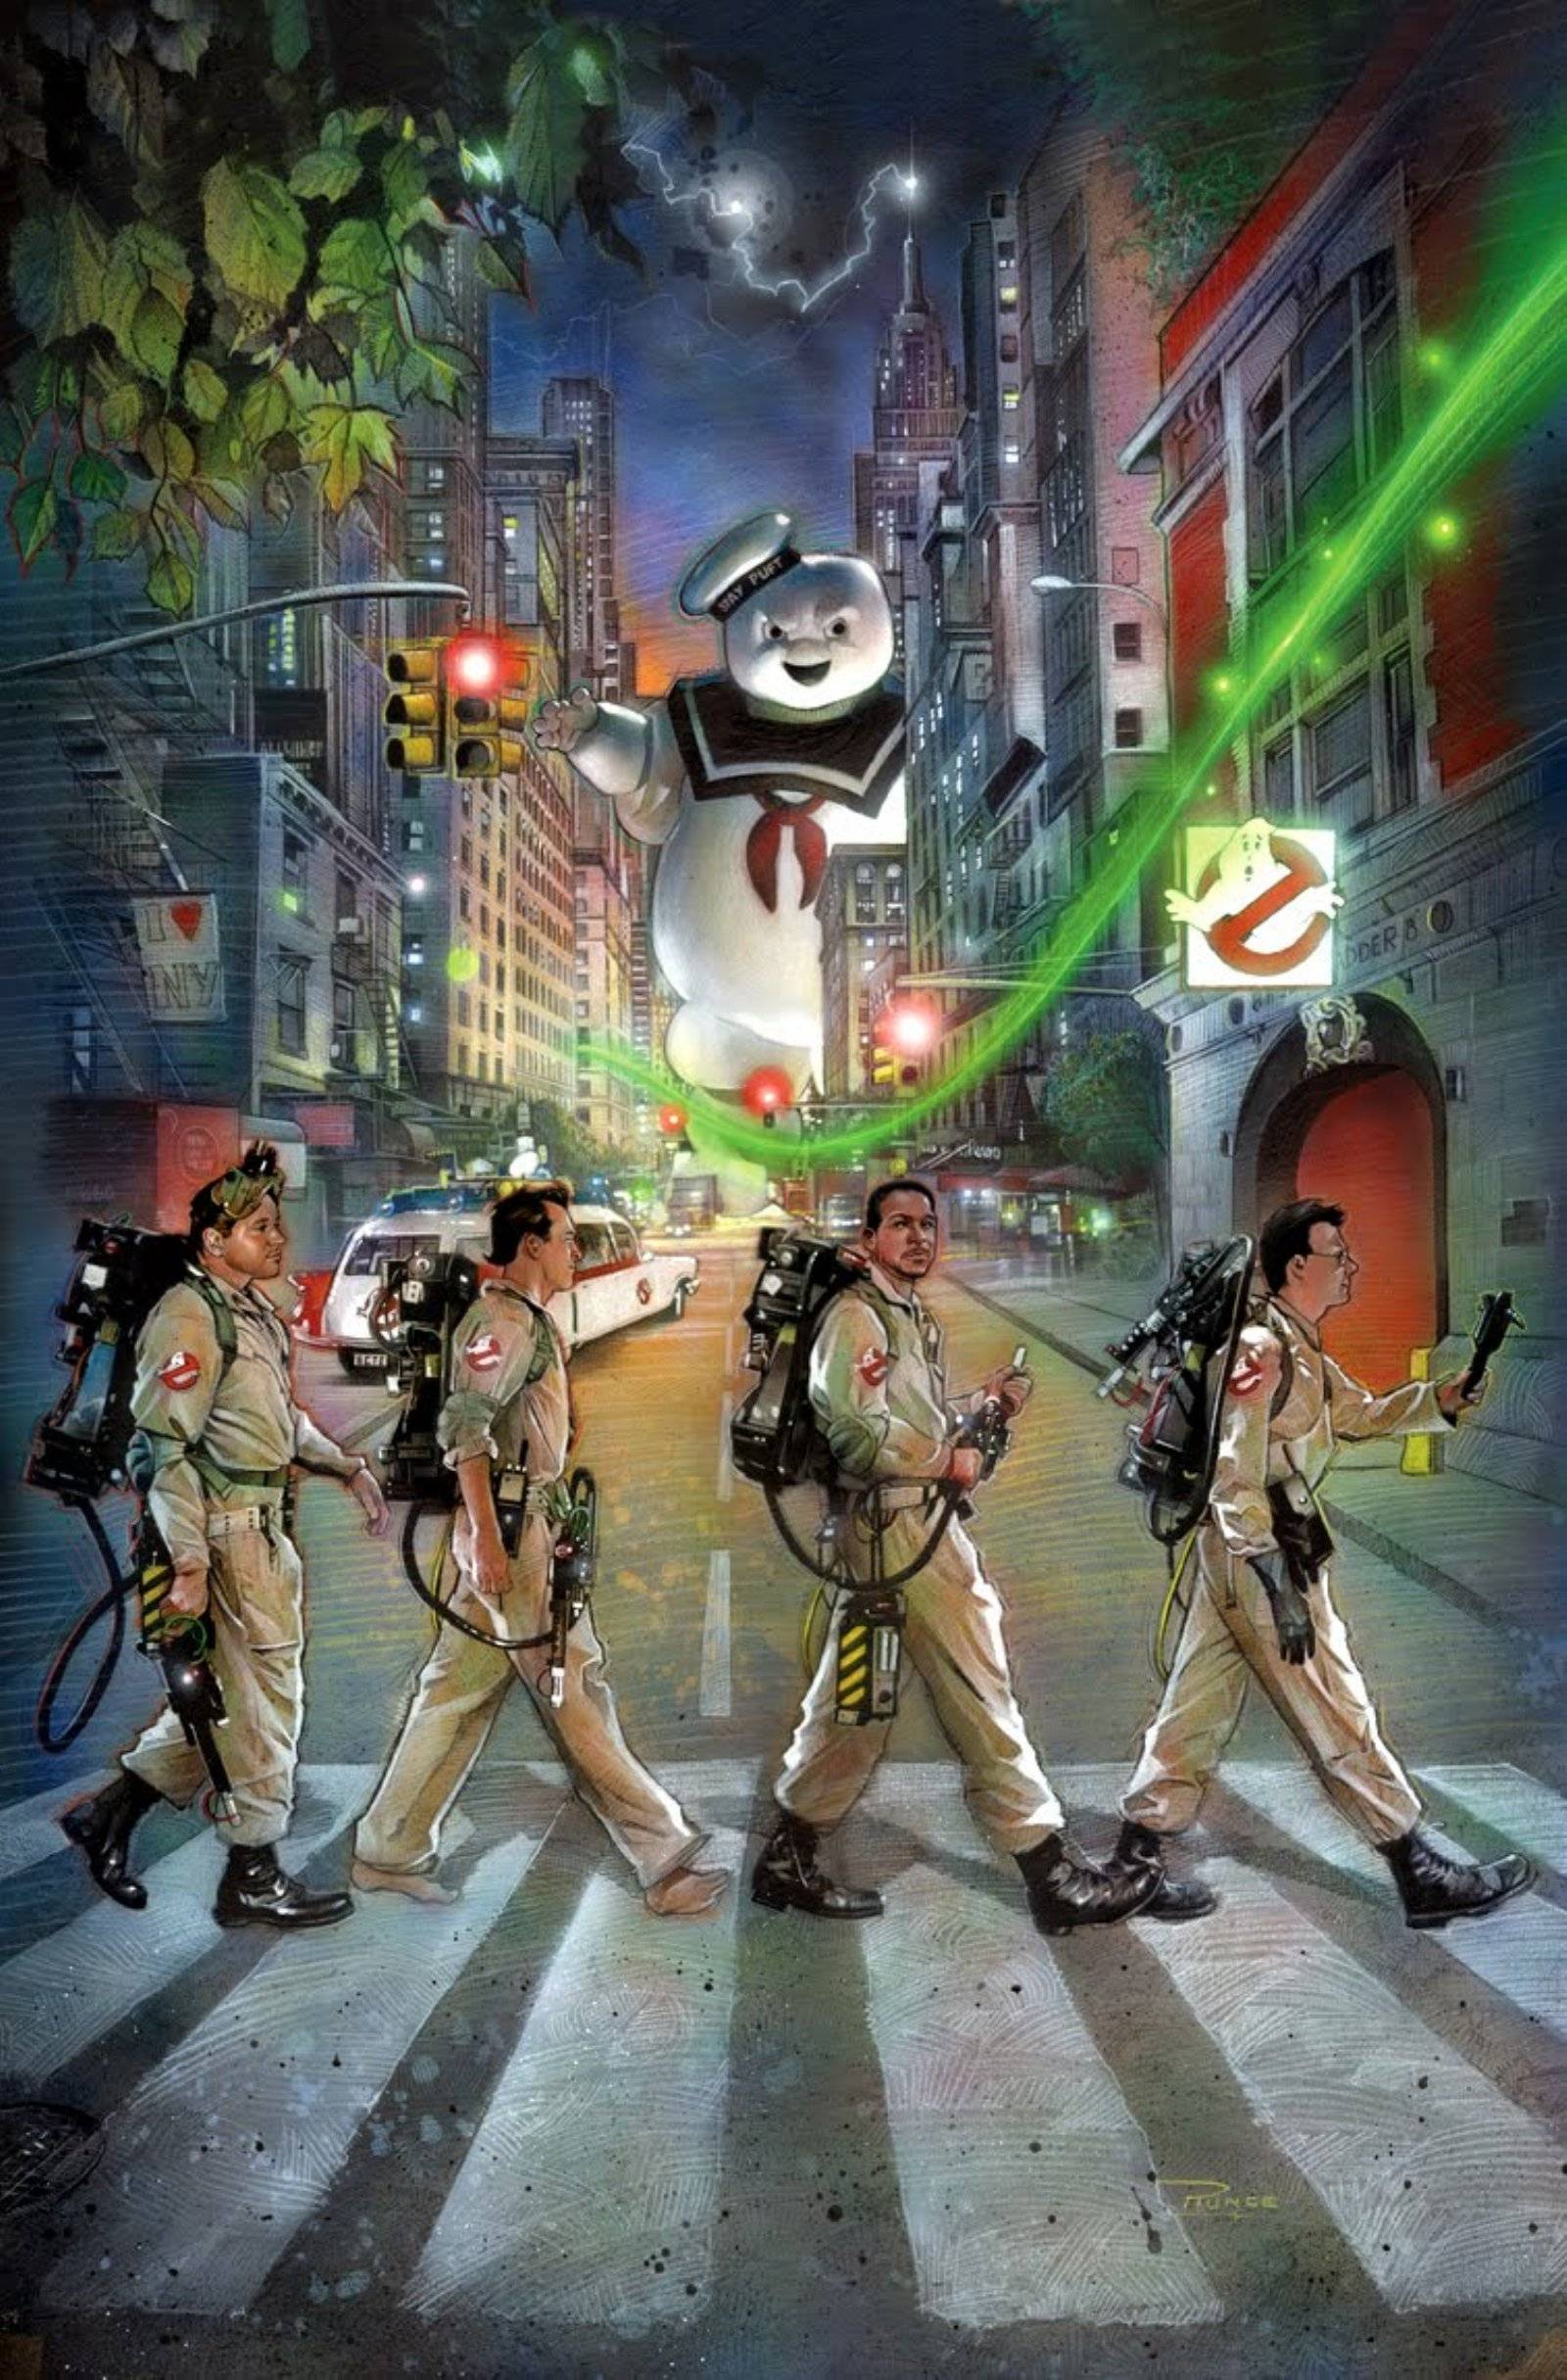 HD wallpaper ghostbusters 4k cool picture  Wallpaper Flare